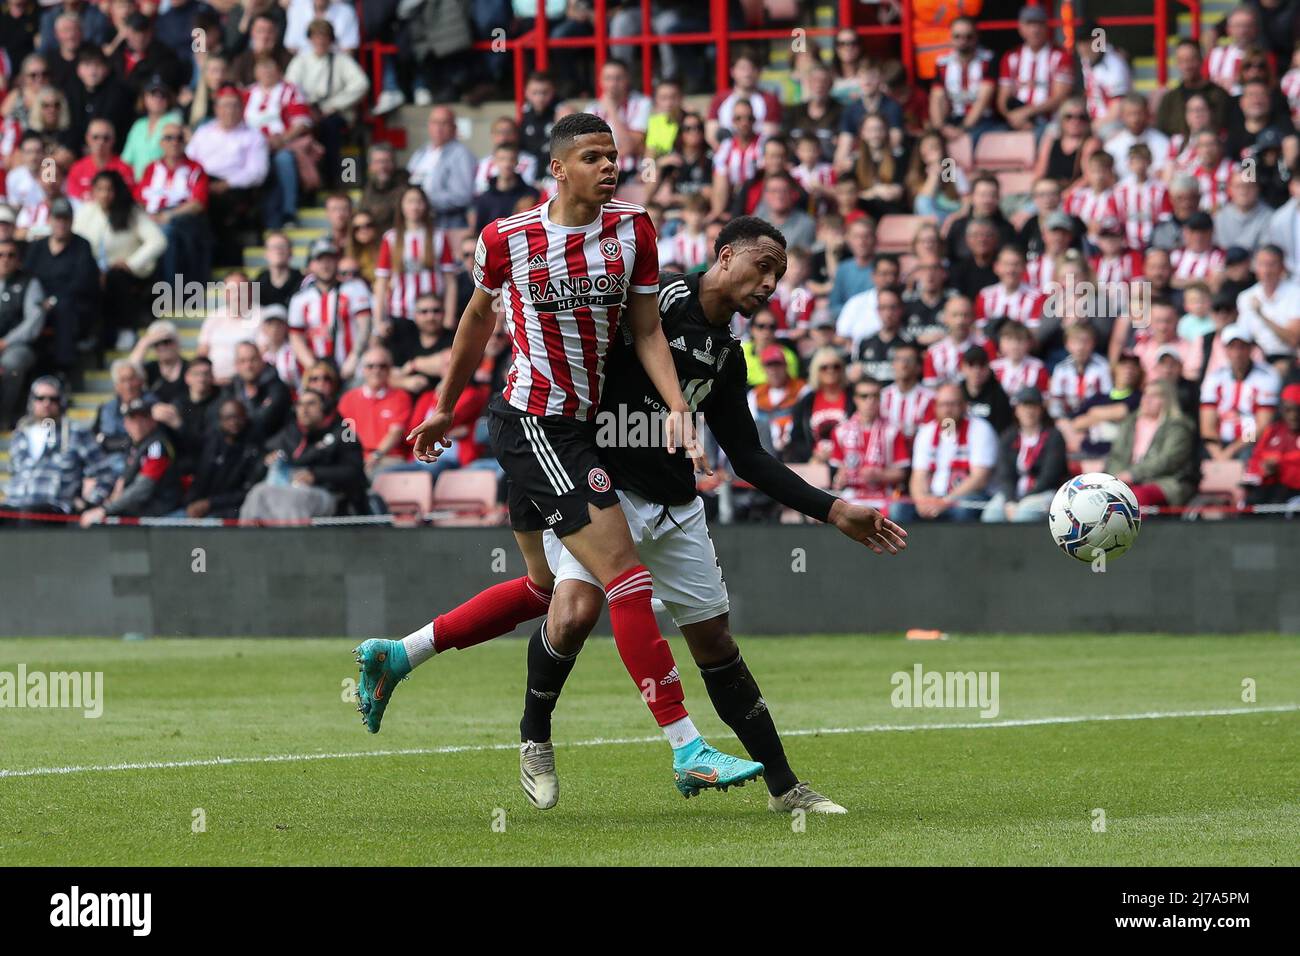 William Osula #32 of Sheffield United and Kenny Tete #2 of Fulham battle for the ball Stock Photo